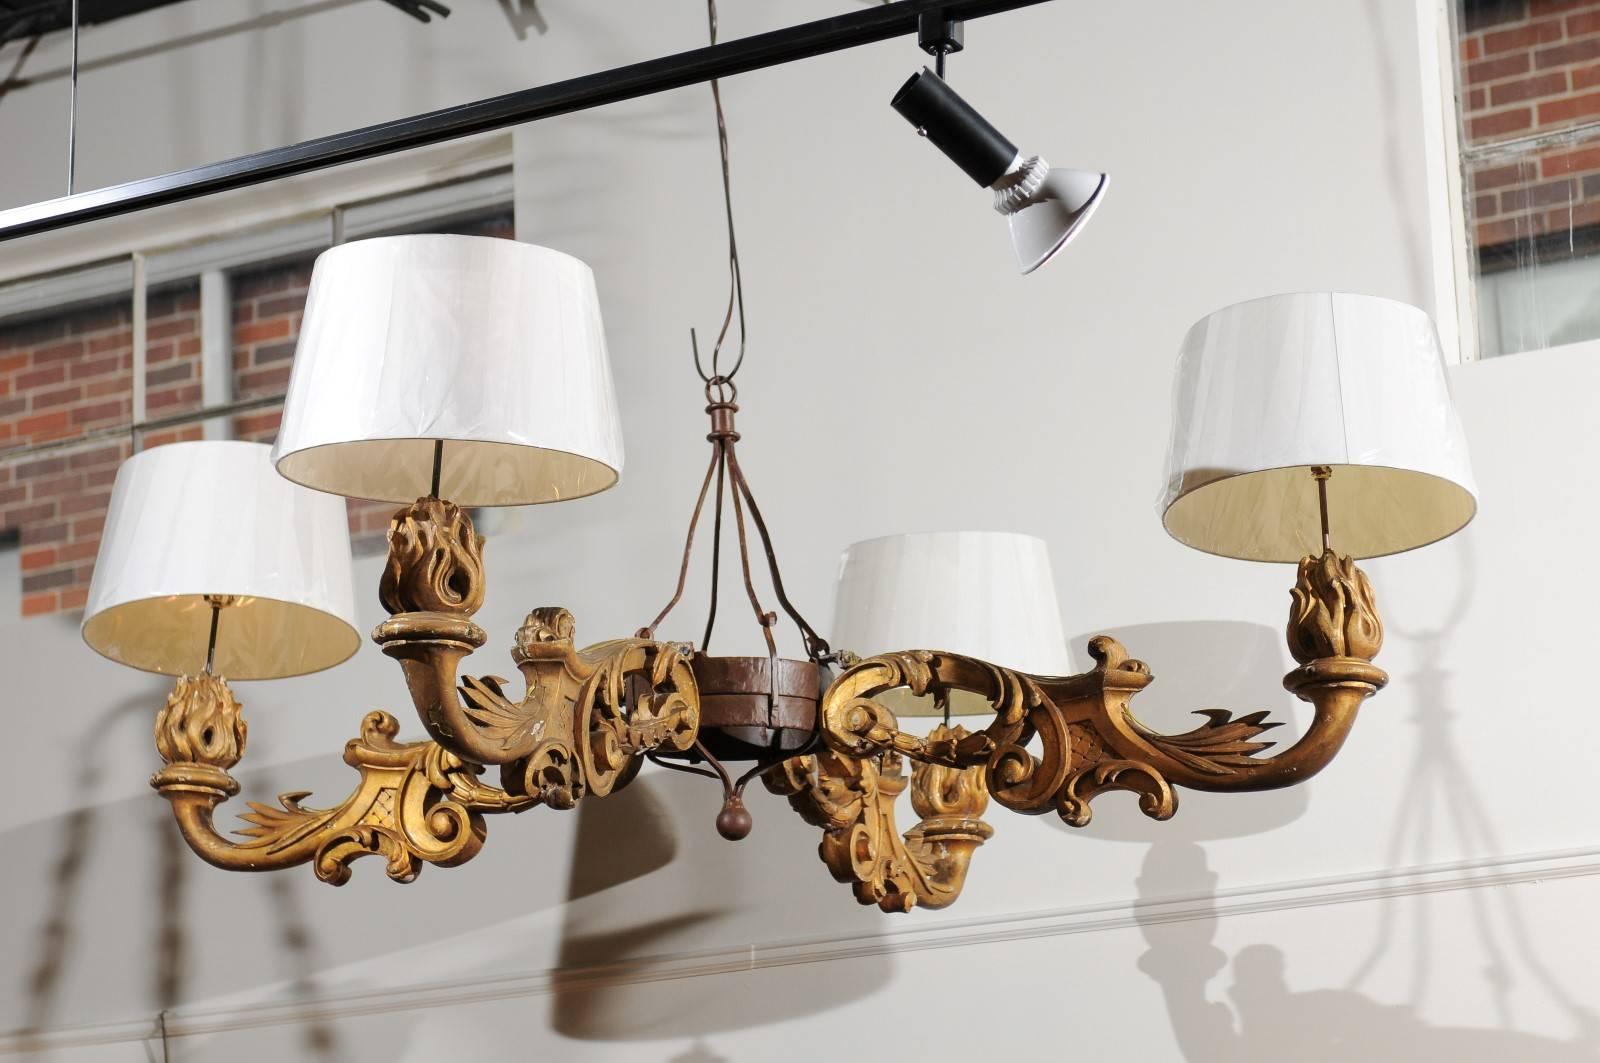 Italian Chandelier Made from Architectural Elements